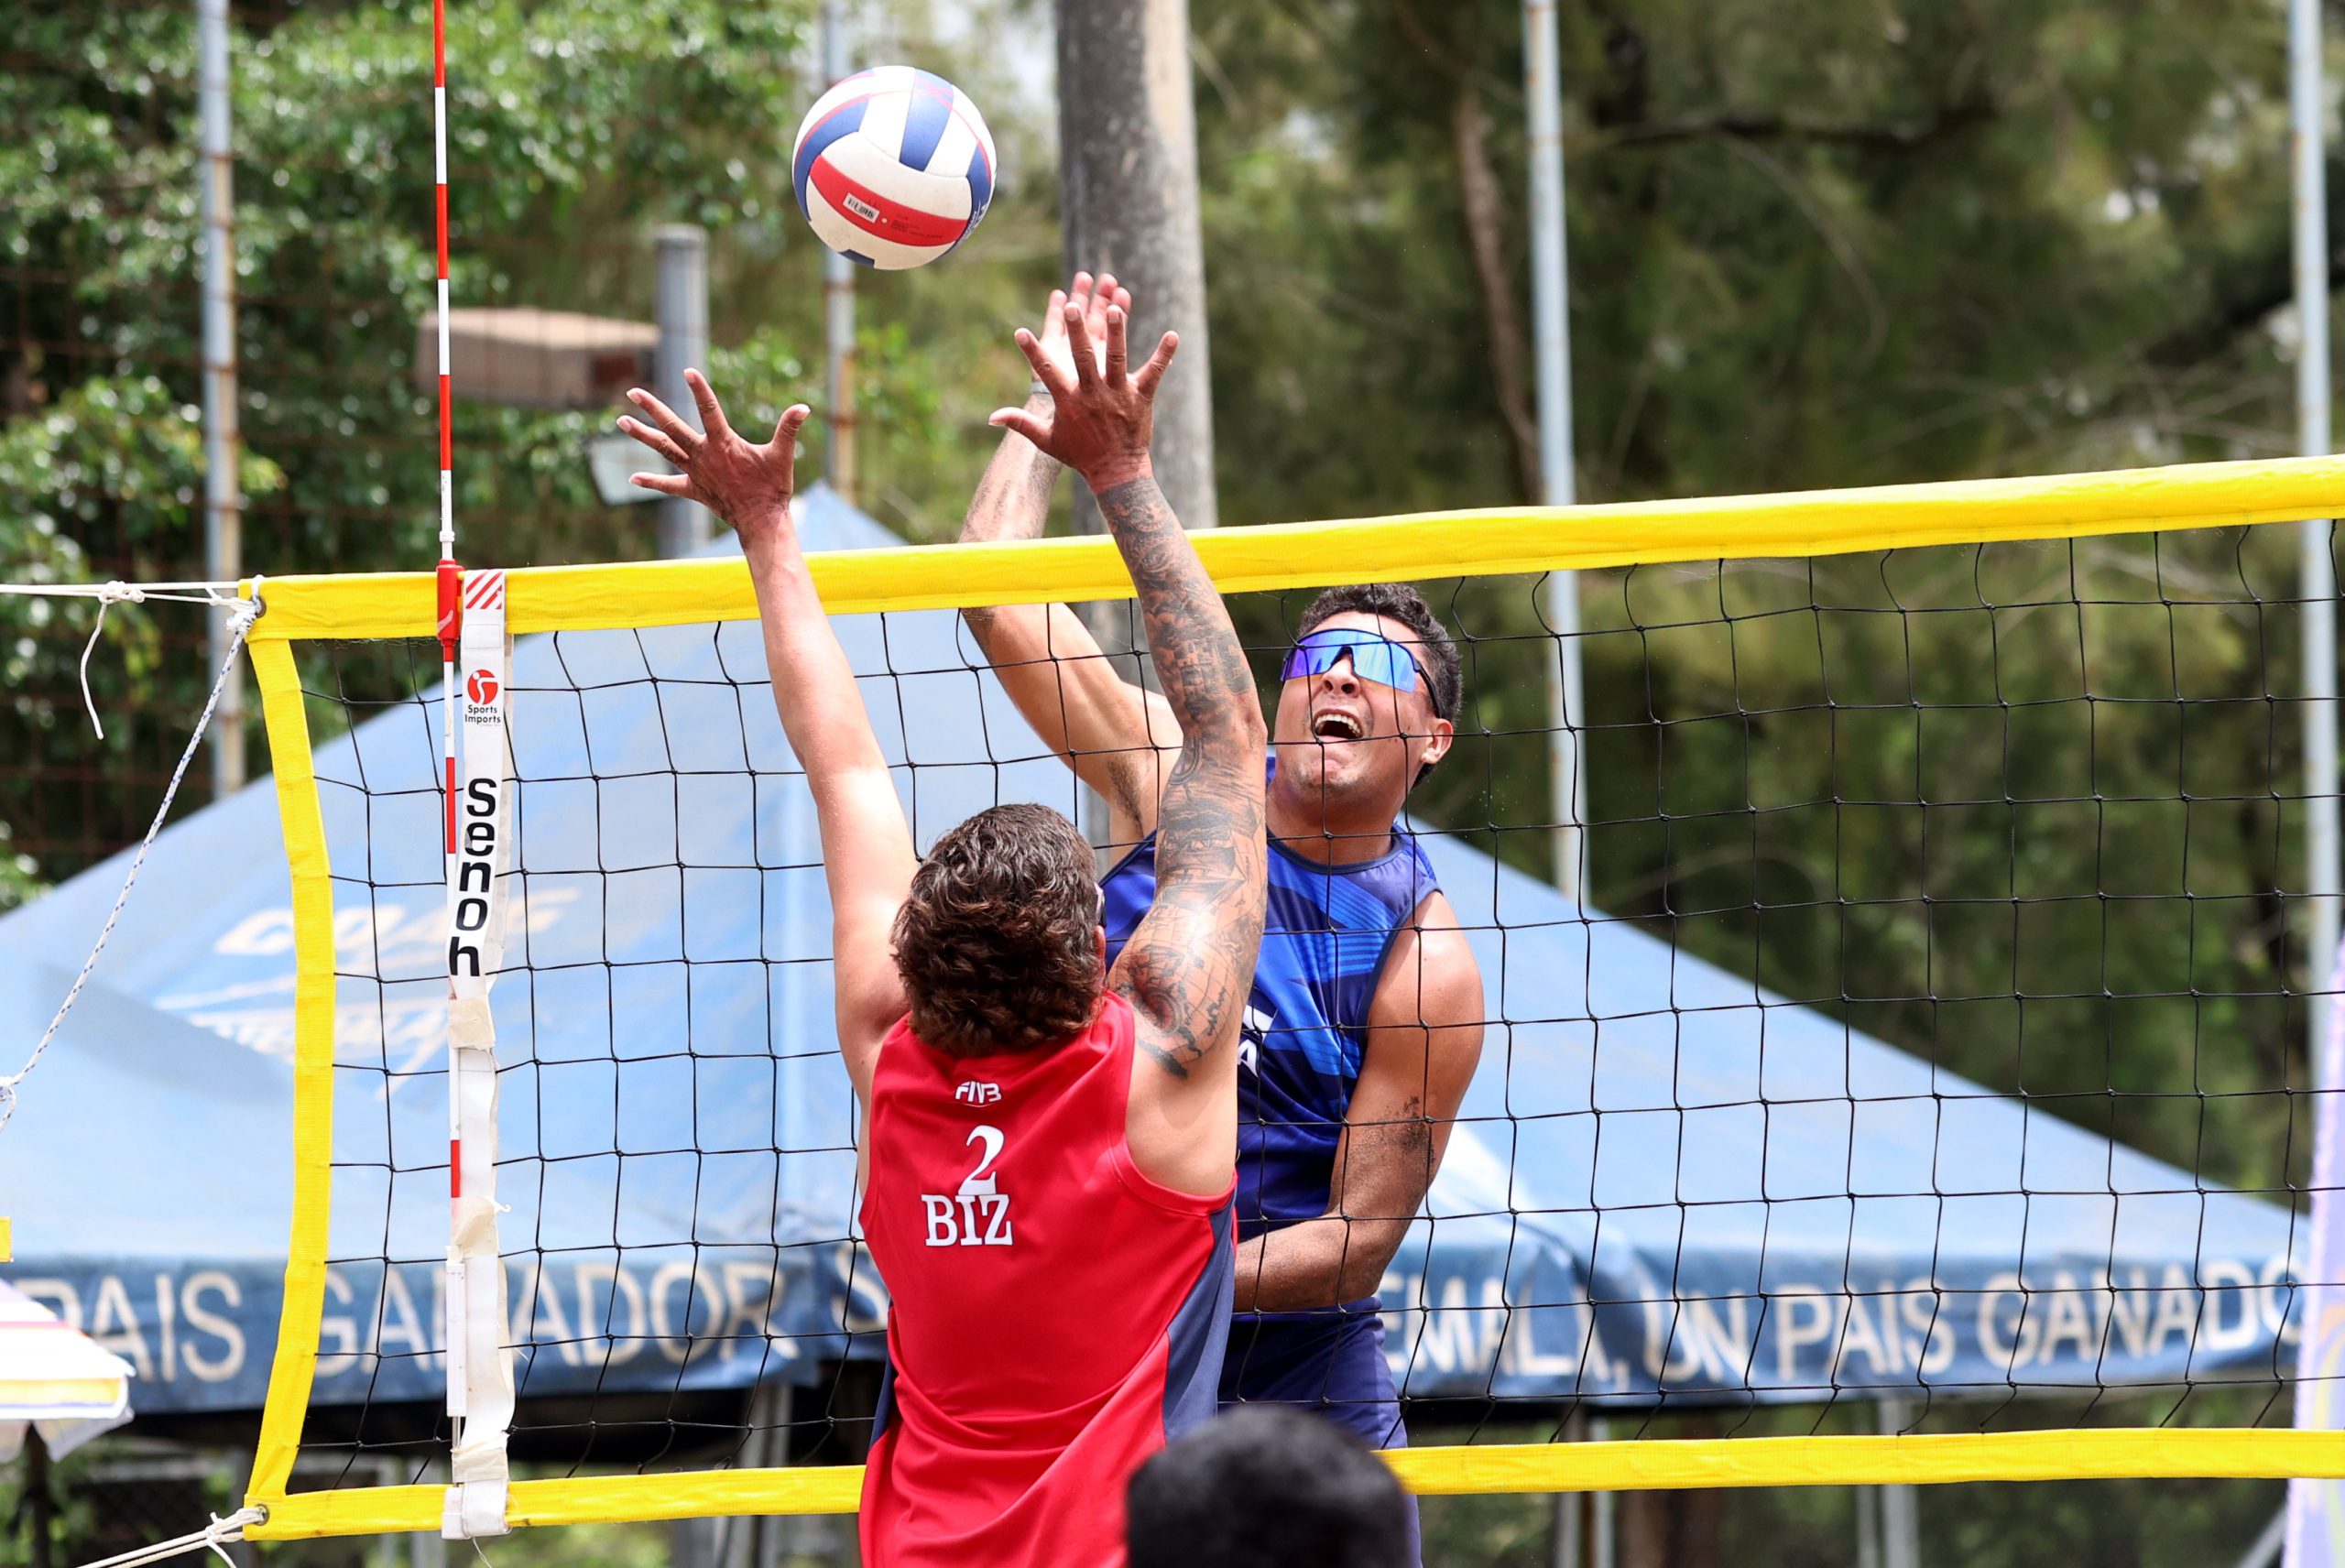 Reigning Champions Cascante/López start the Central American Senior Beach Championship on the right foot